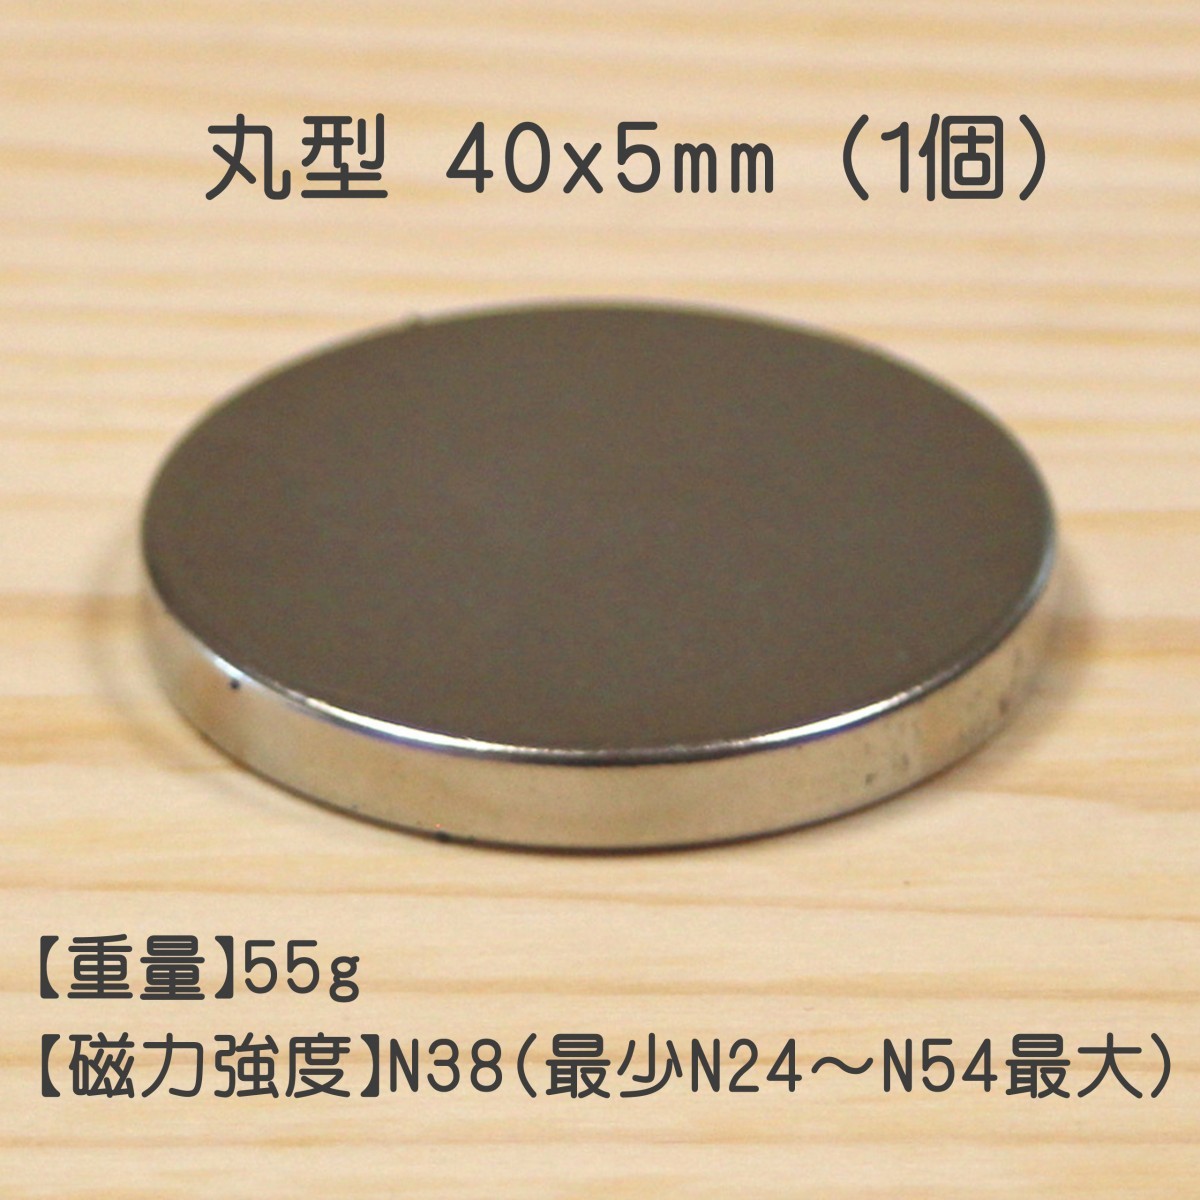  Neo Jim magnet round round shape 40x5mm 1 piece magnet large neodymium magnet powerful . power permanent magnet experiment research DIY Sunday large . construction raw materials tool using road I der practical use convenience 